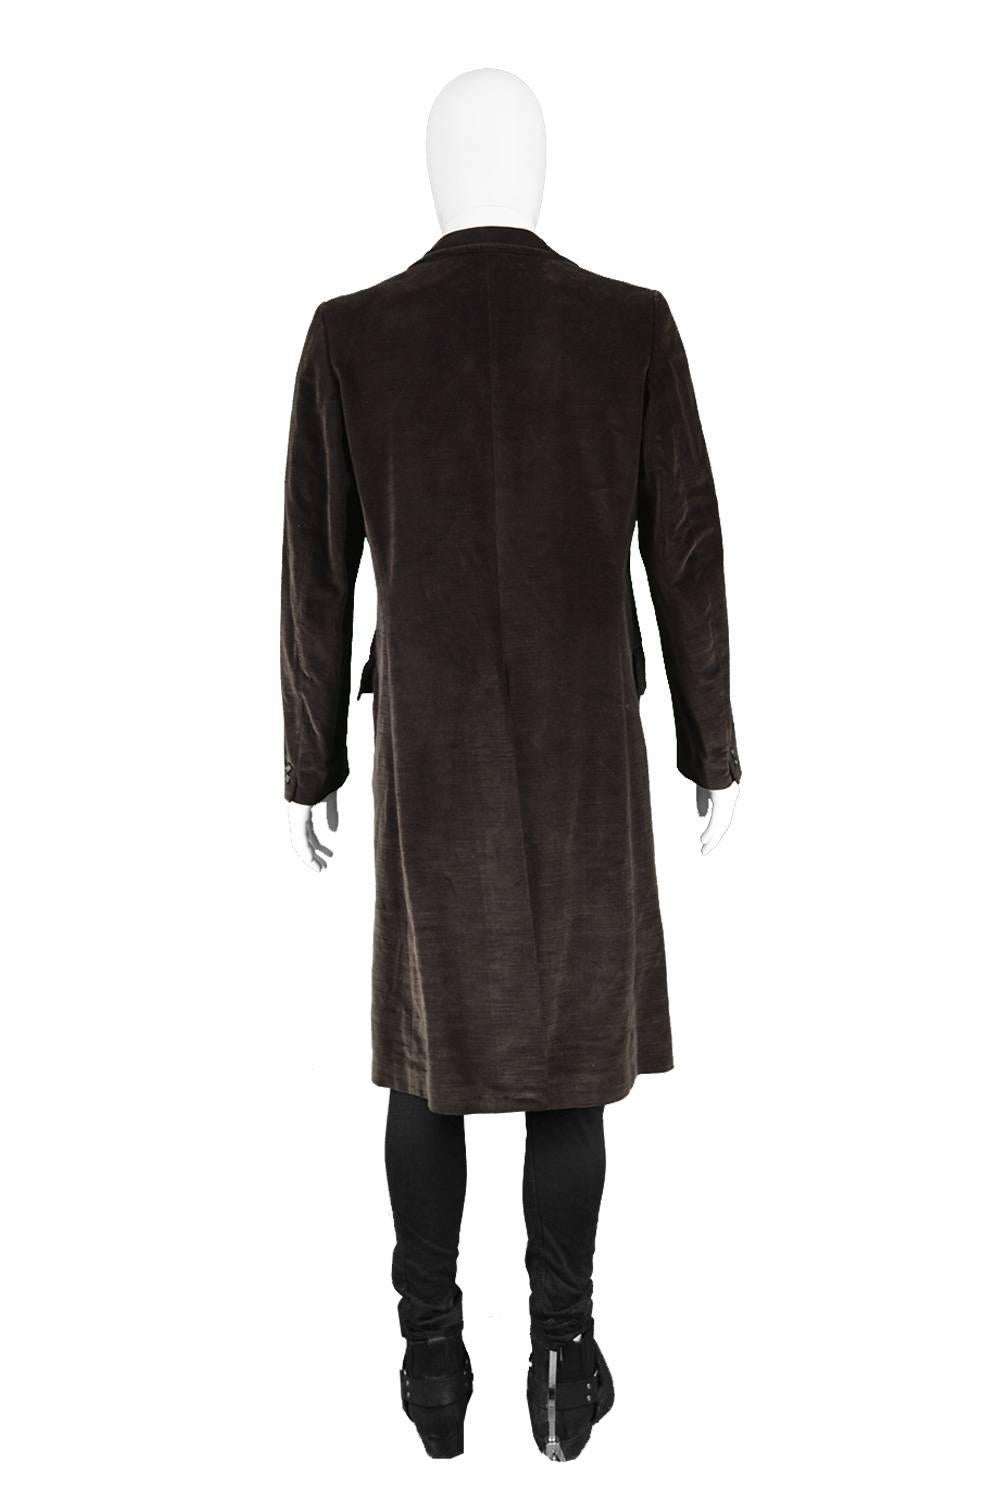 Black Ted Lapidus Men's Vintage Brown Double Breasted Velvet Trench Coat, 1970s For Sale